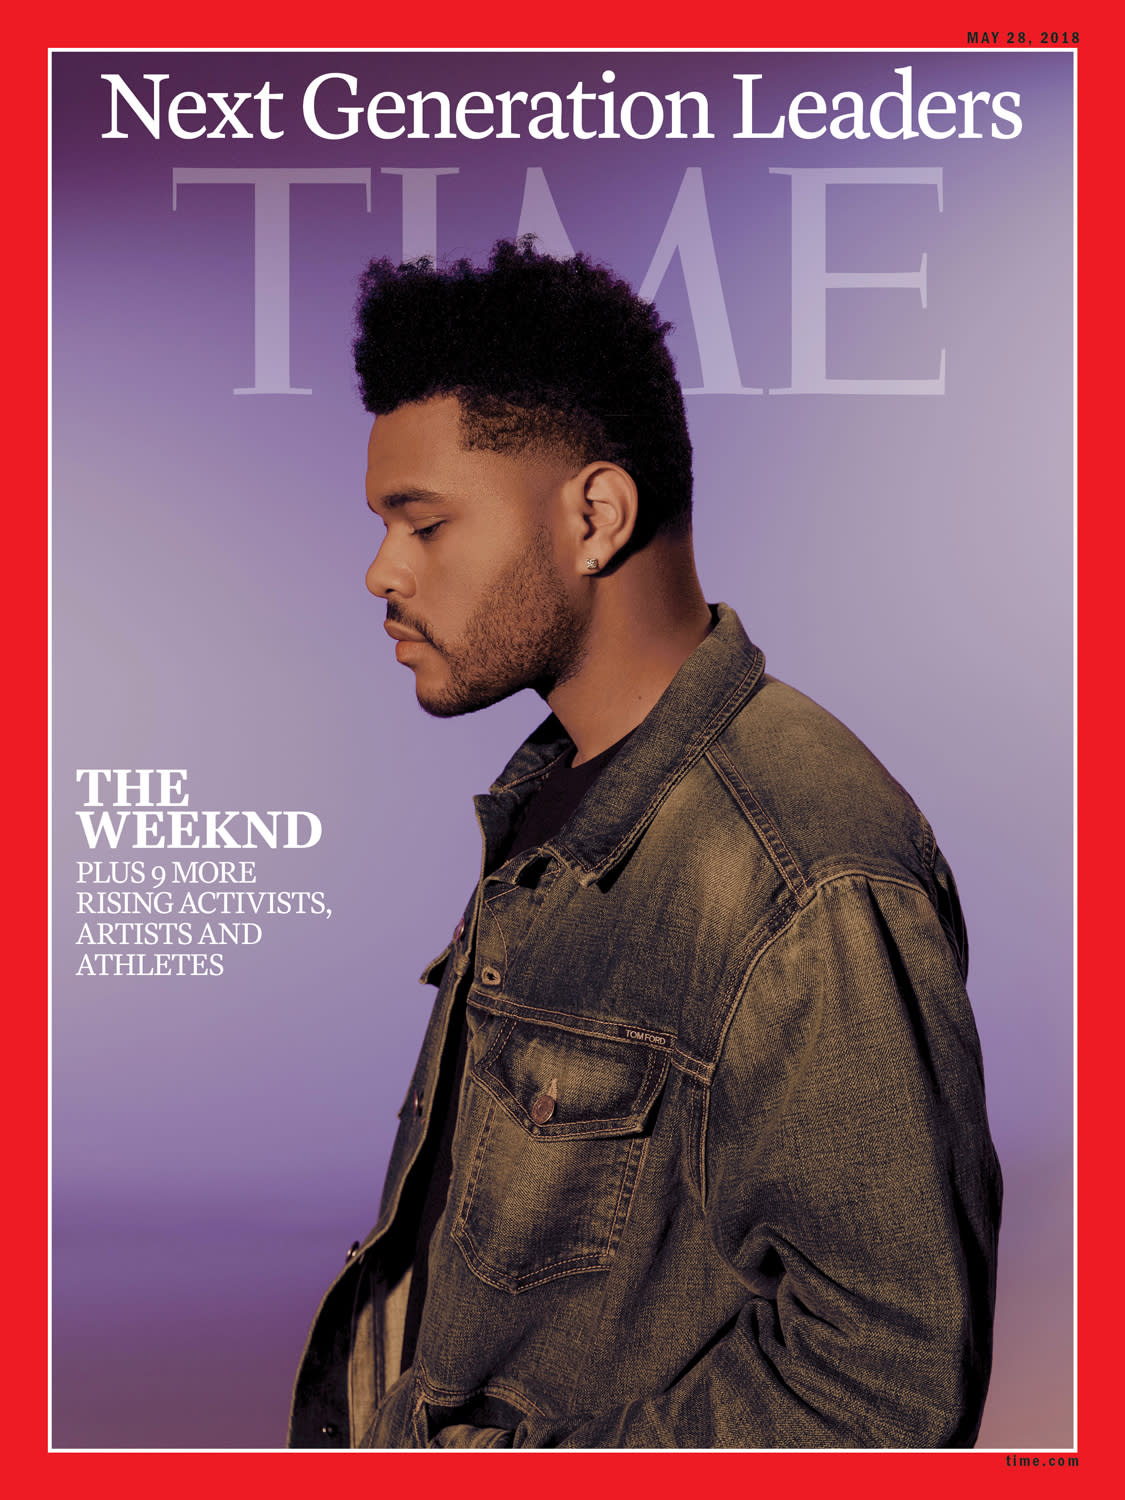 The Weeknd 'Alone Again' Poster - Defining